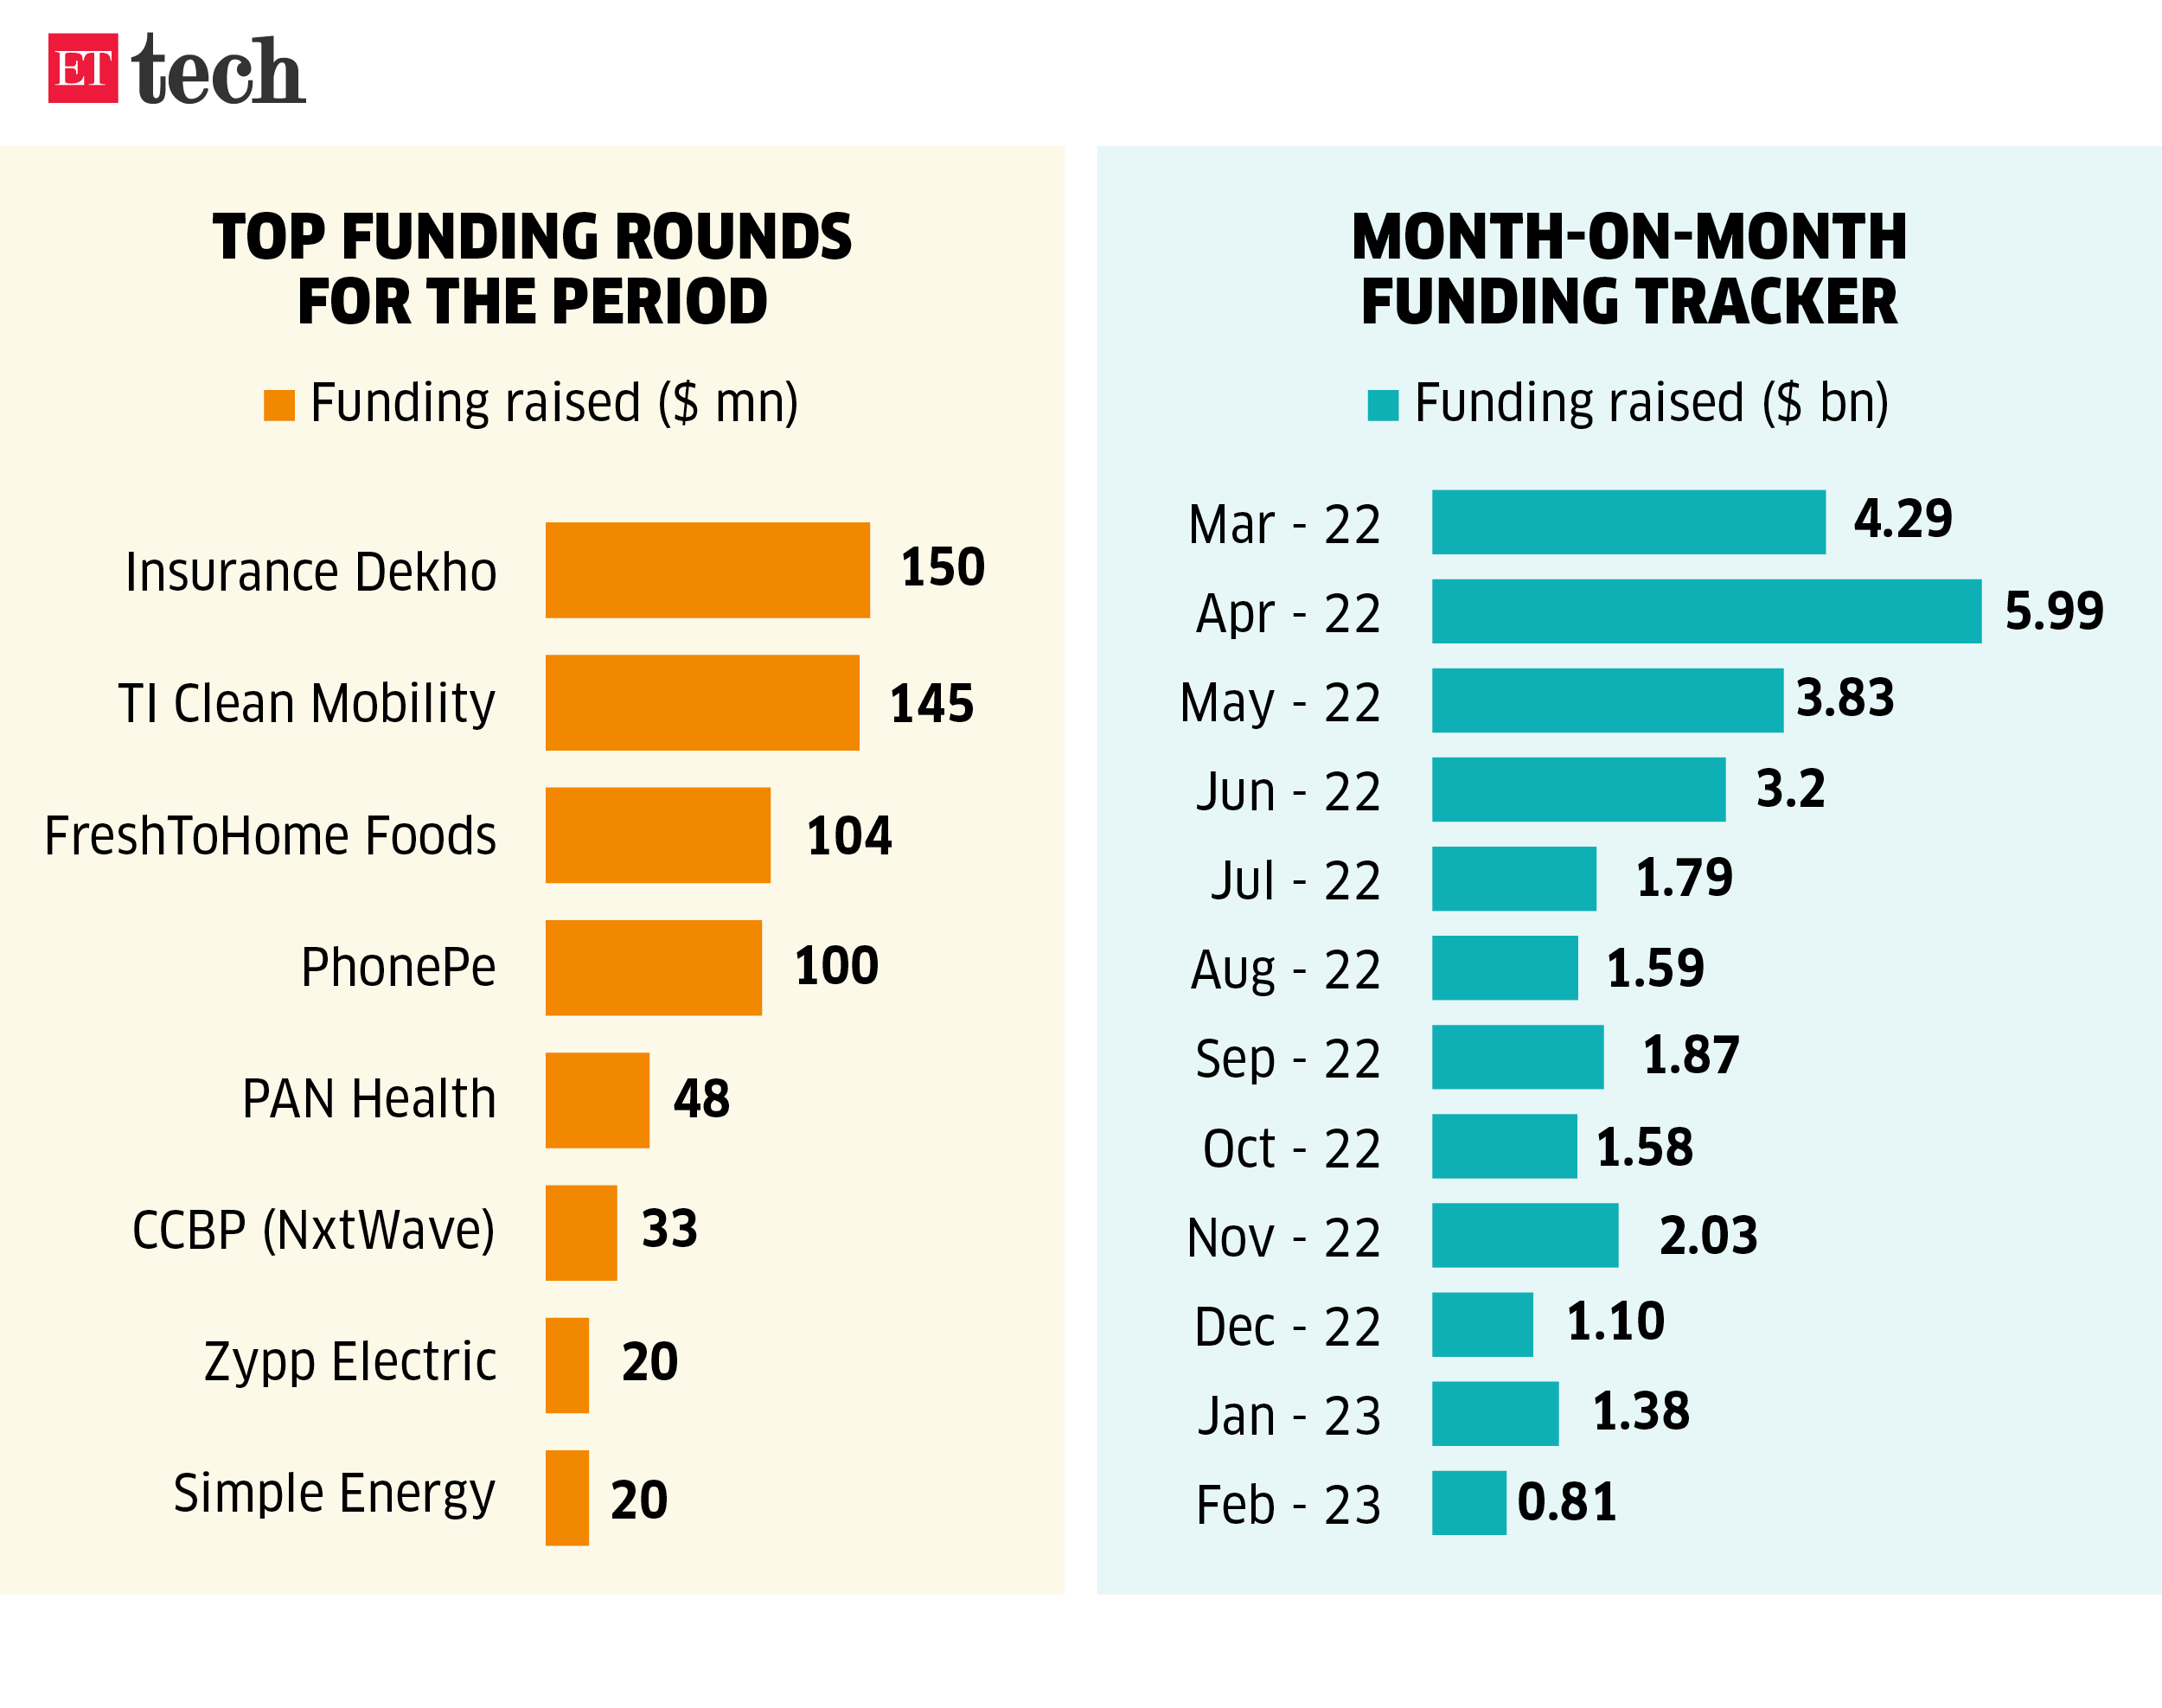 Top funding rounds for the period